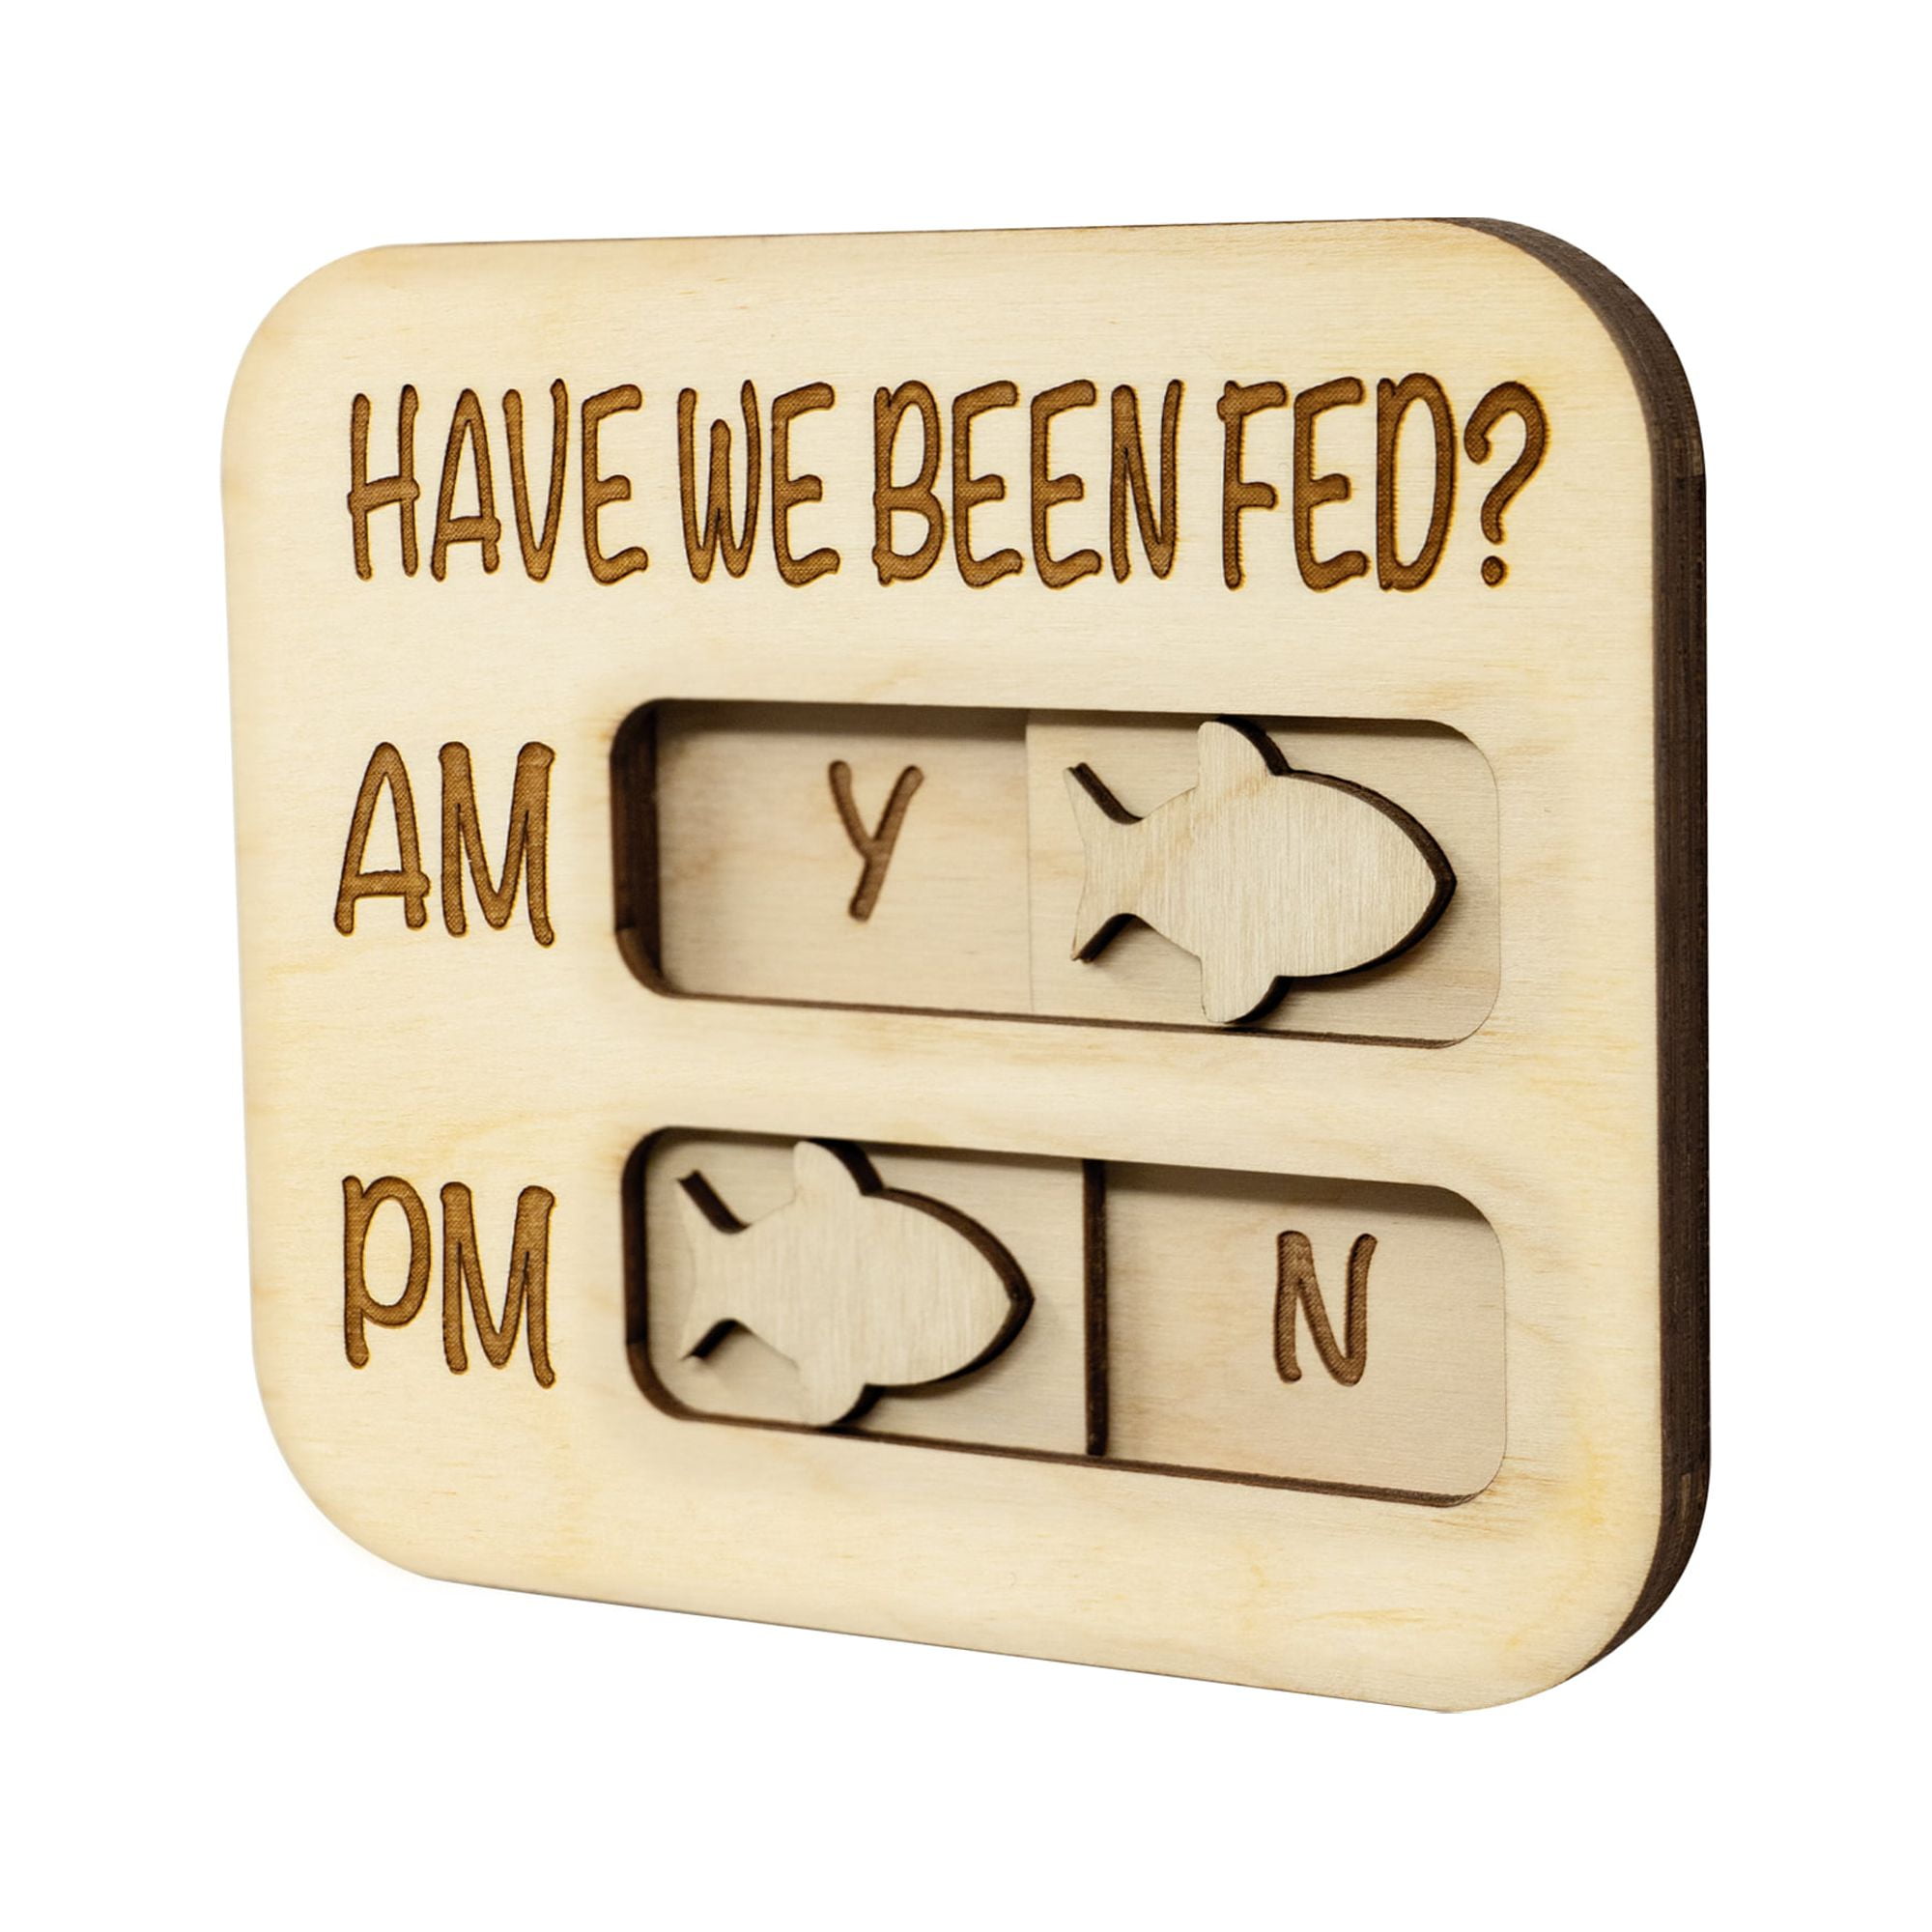 DID YOU FEED THE DOG Mountable Tracker Device Magnets on Back